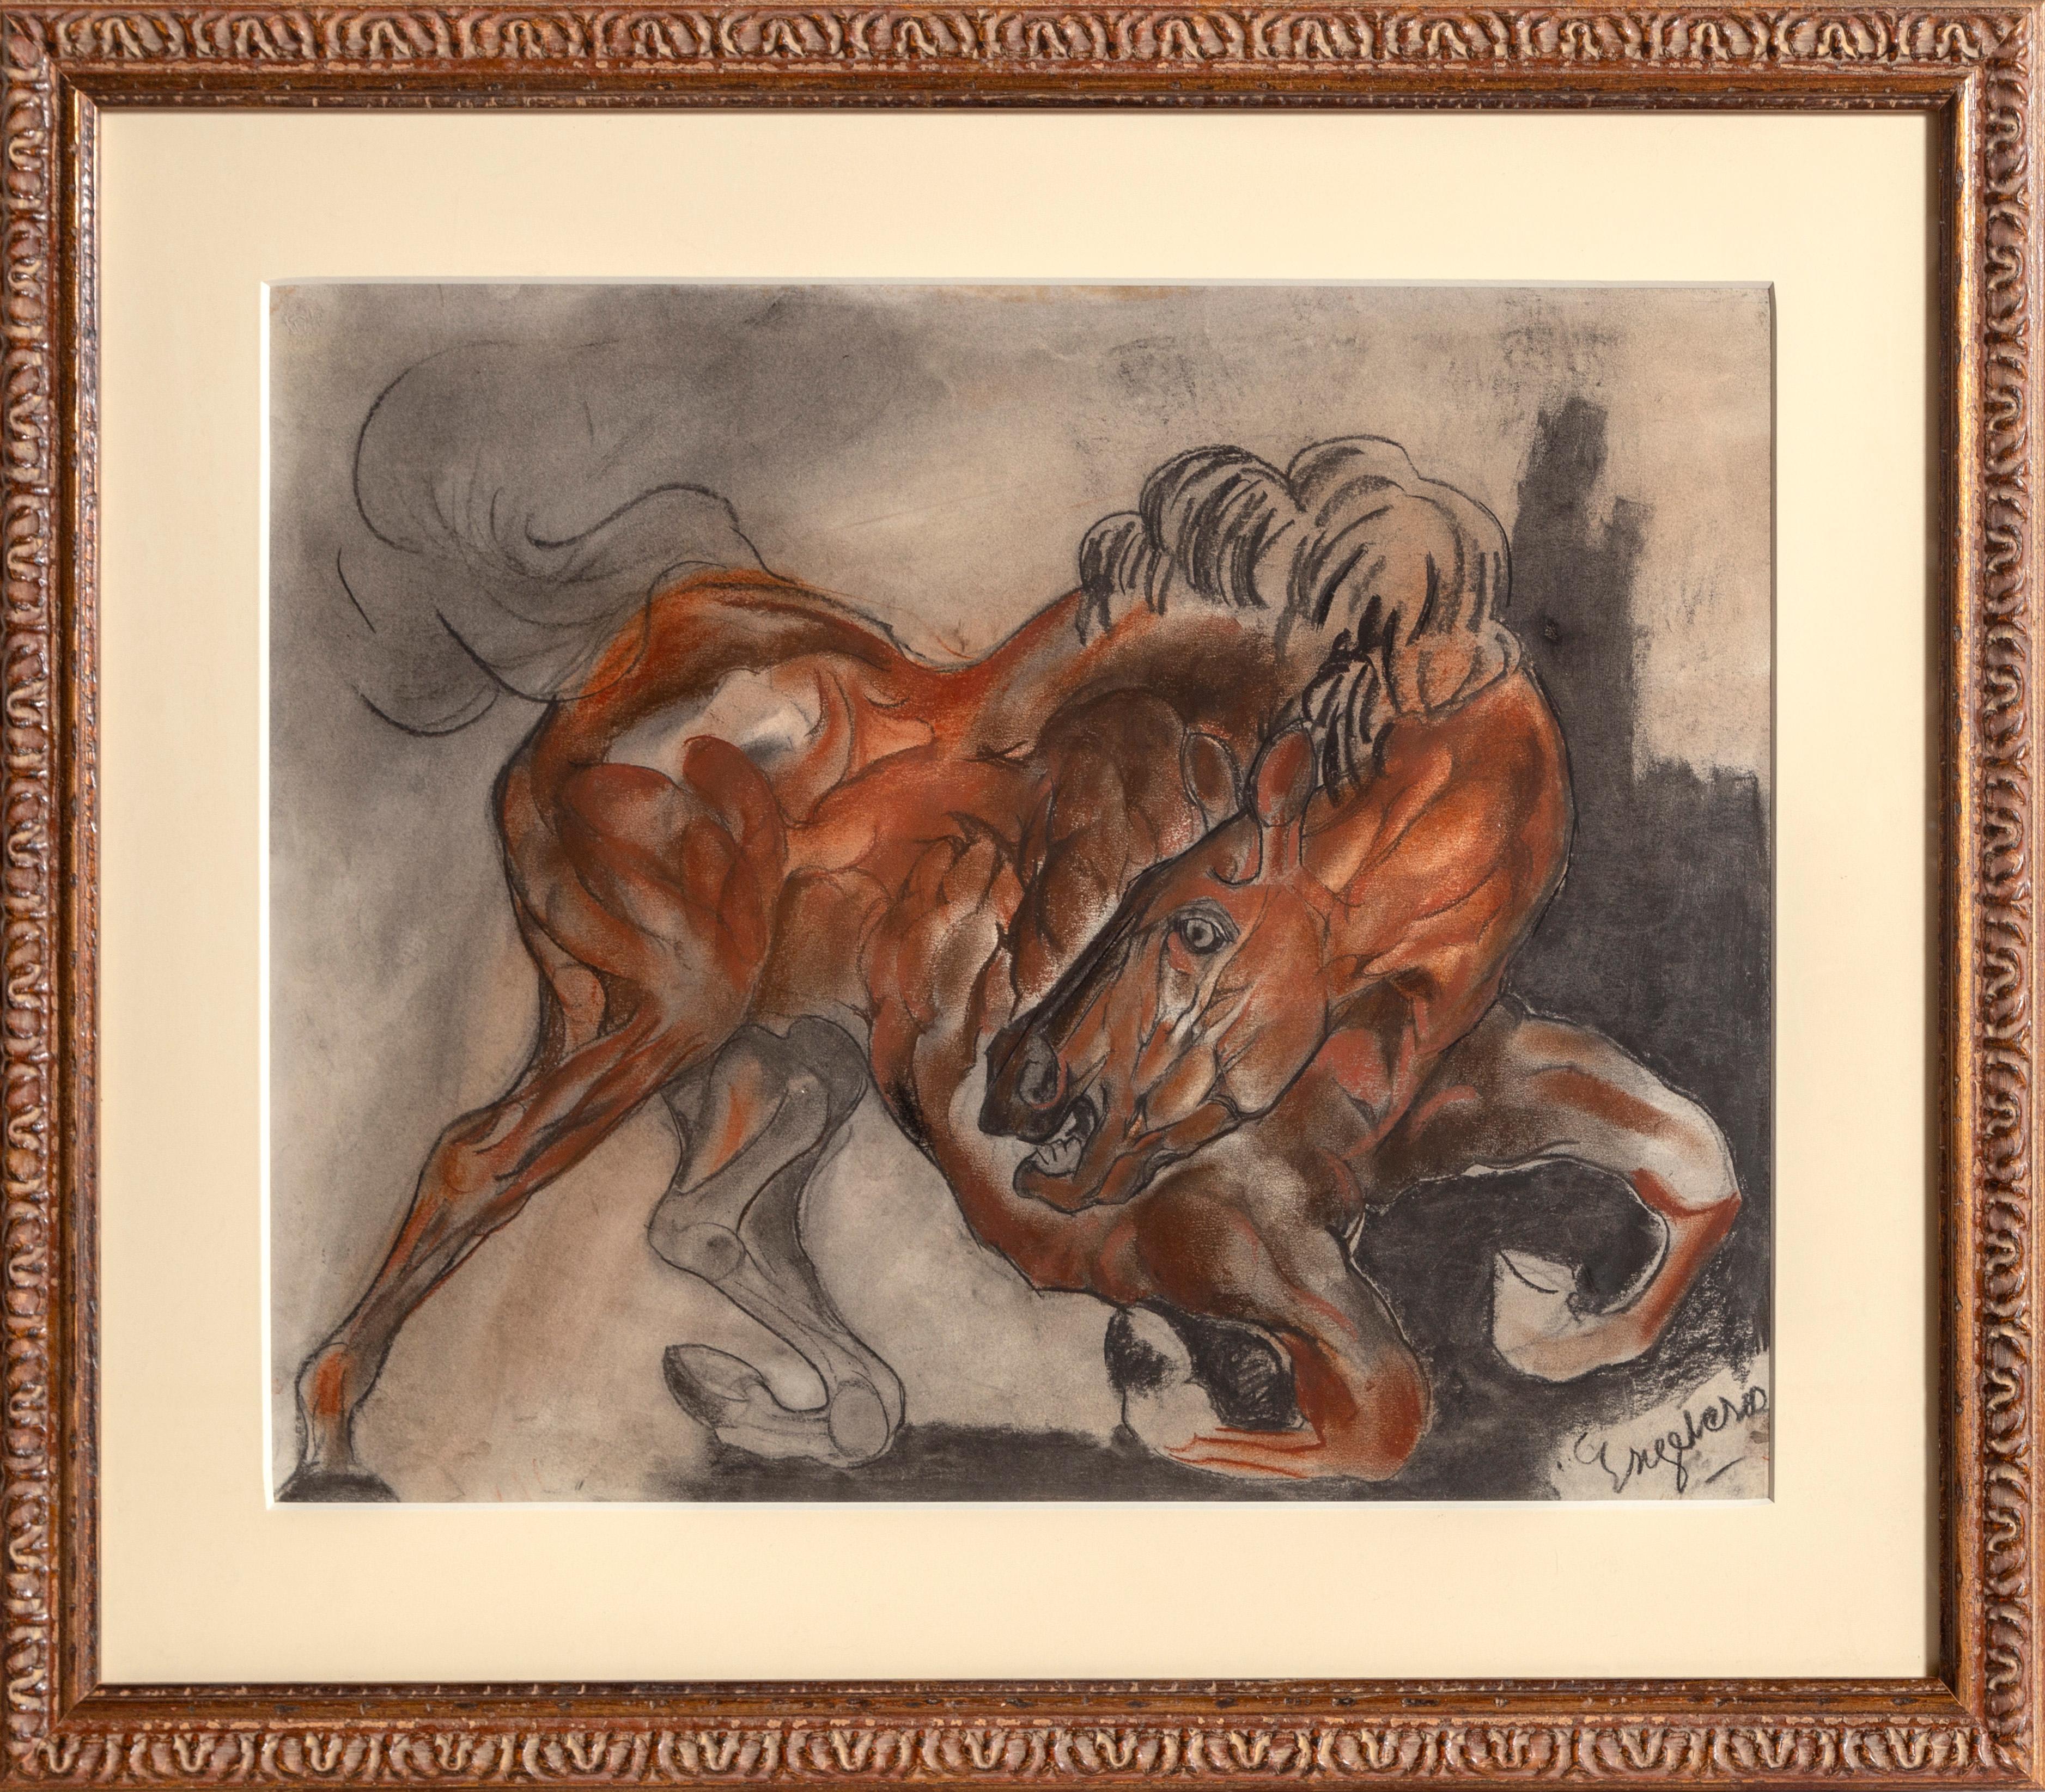 Wild Horse, Framed Ink and Pastel Drawing